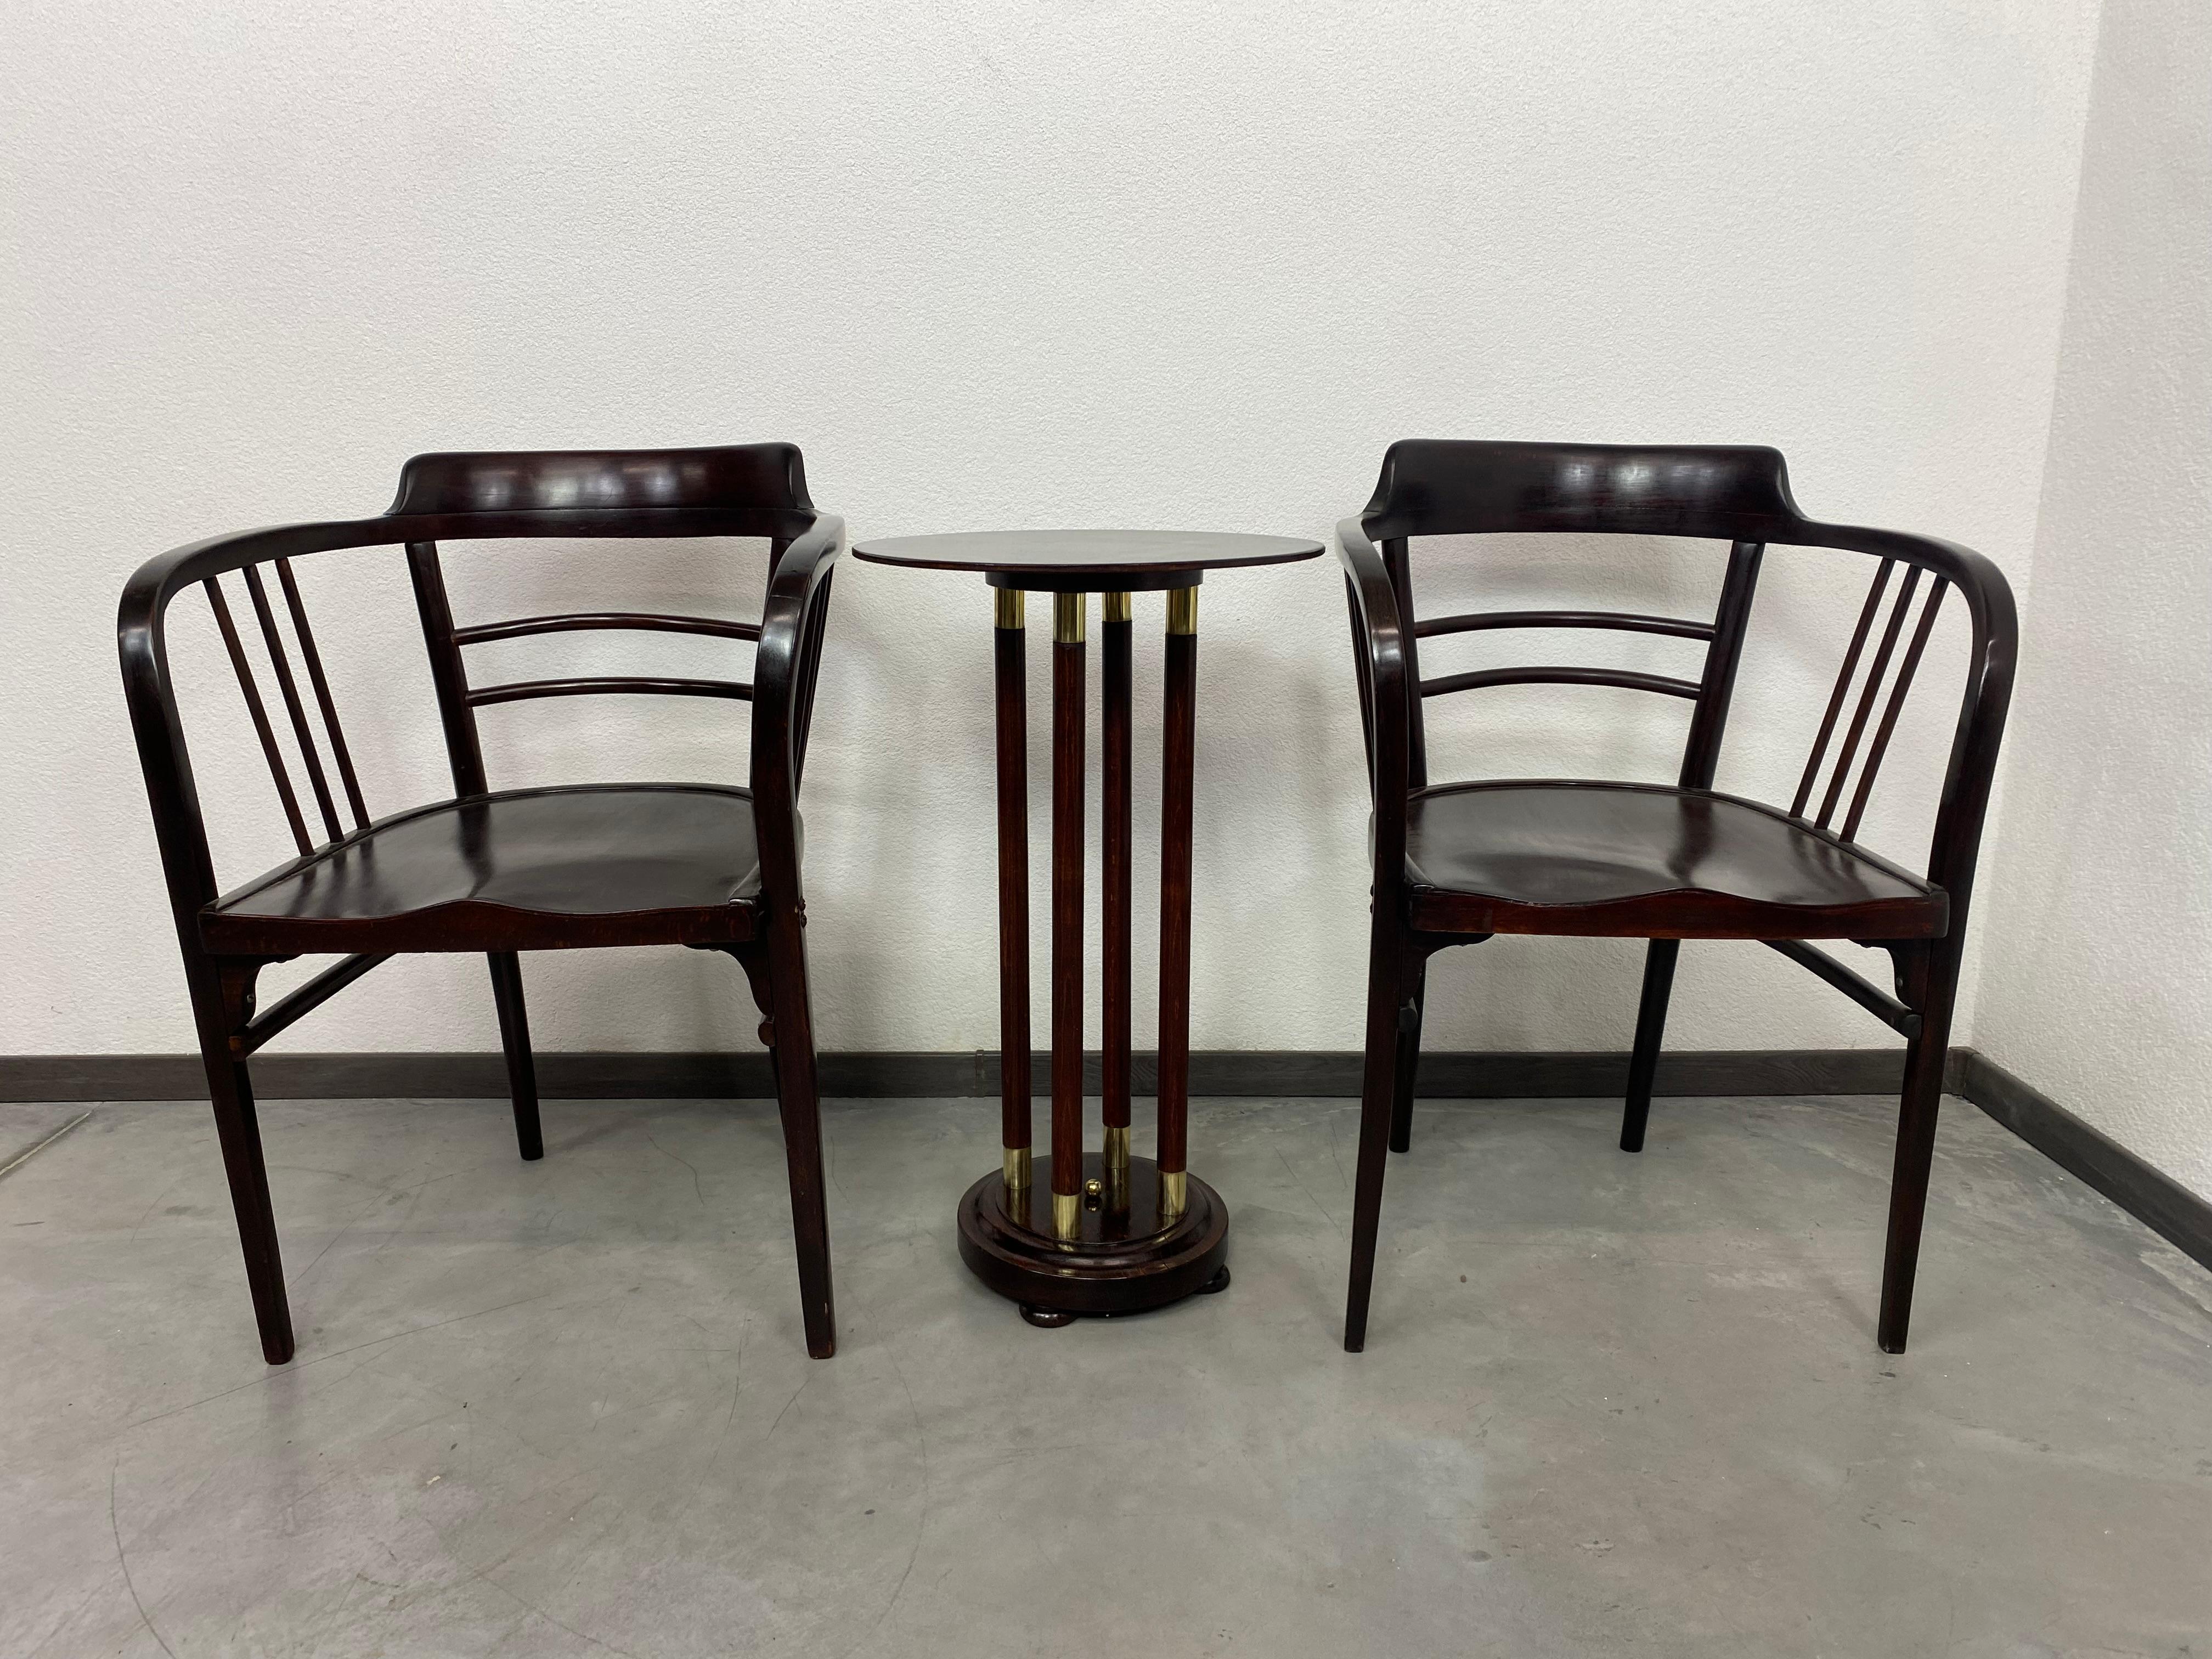 Secession bentwood armchairs by Otto Wagner for Thonet. Armchairs were restored in the past, needs to be need firming up, they are a bit wobbly.